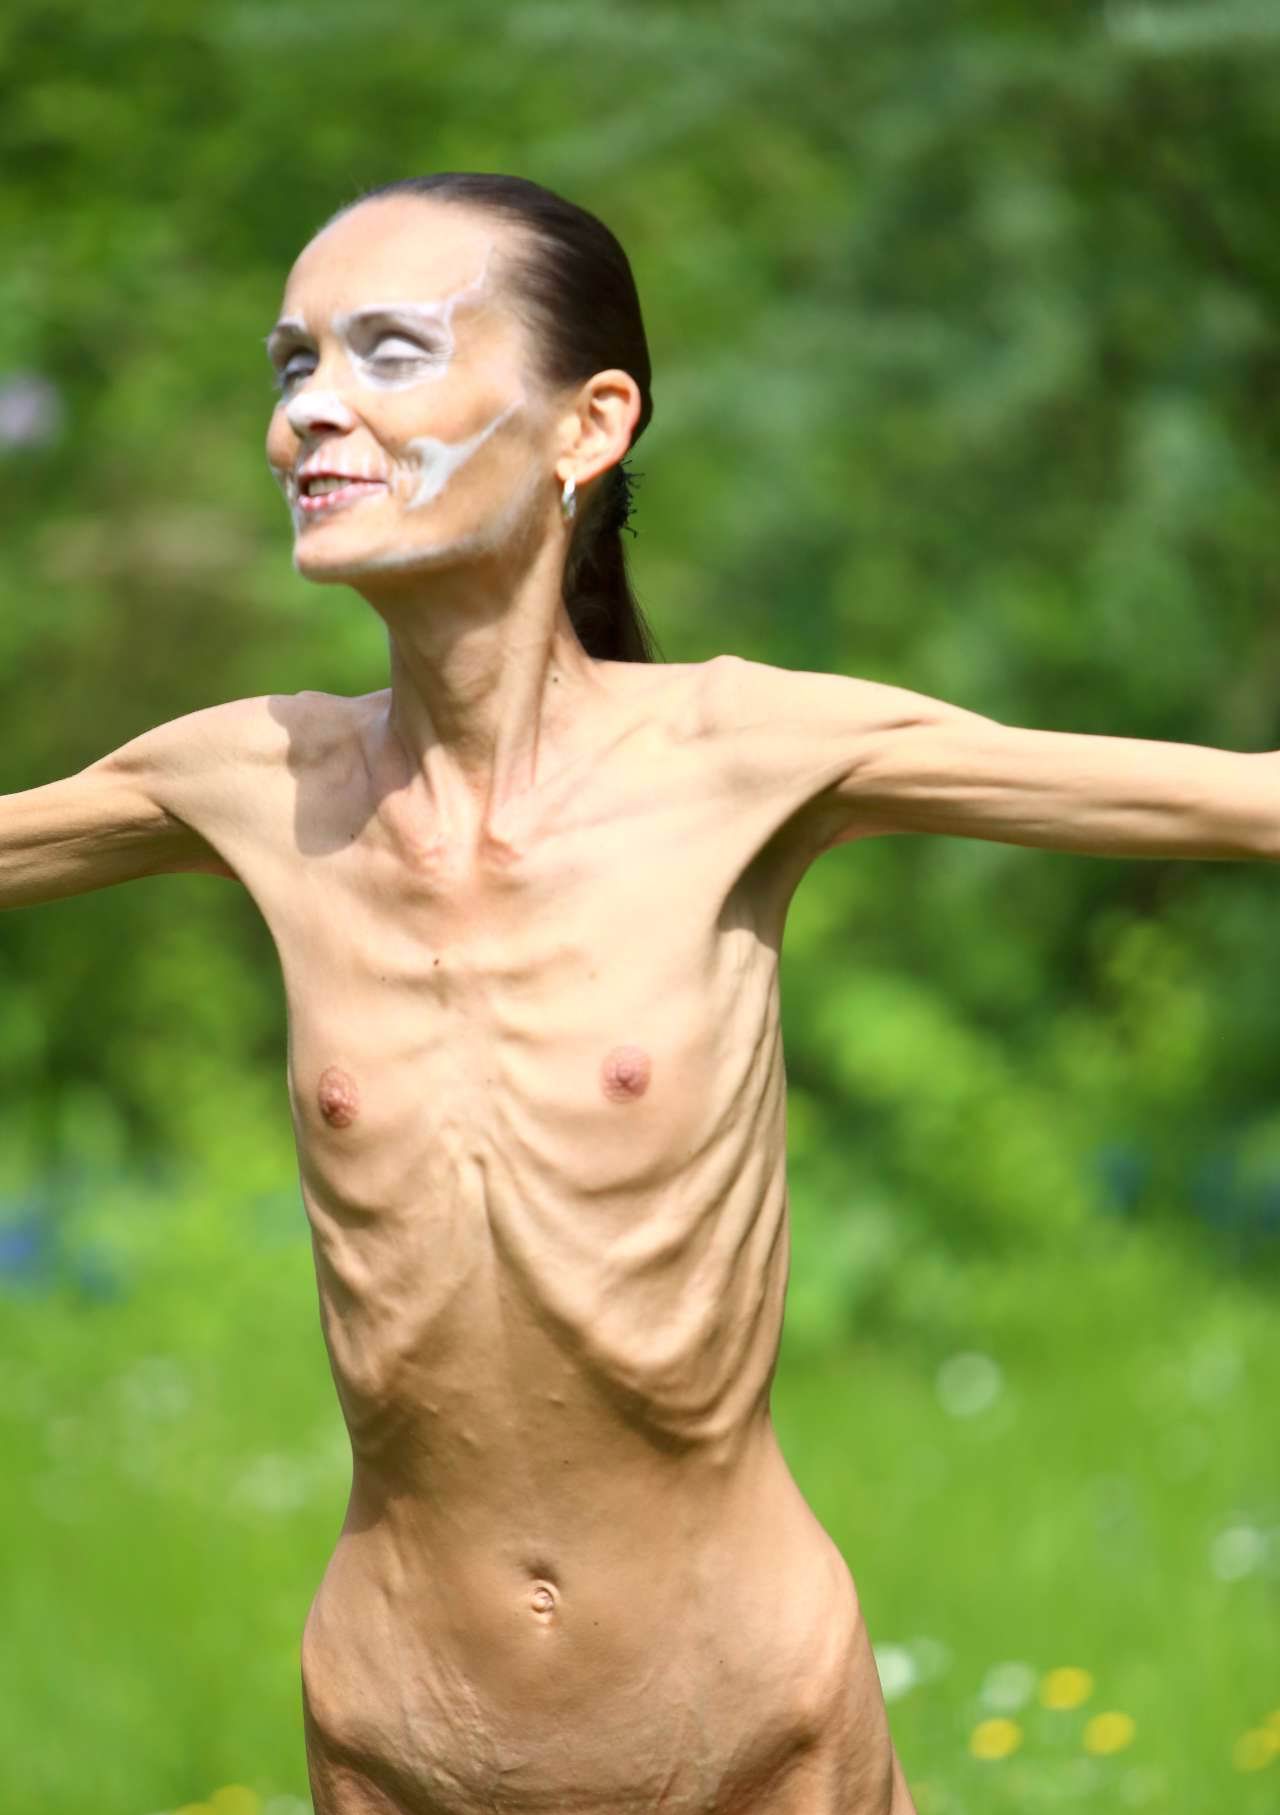 anorexic_model_poses_nude_for_the_camera01.jpg.